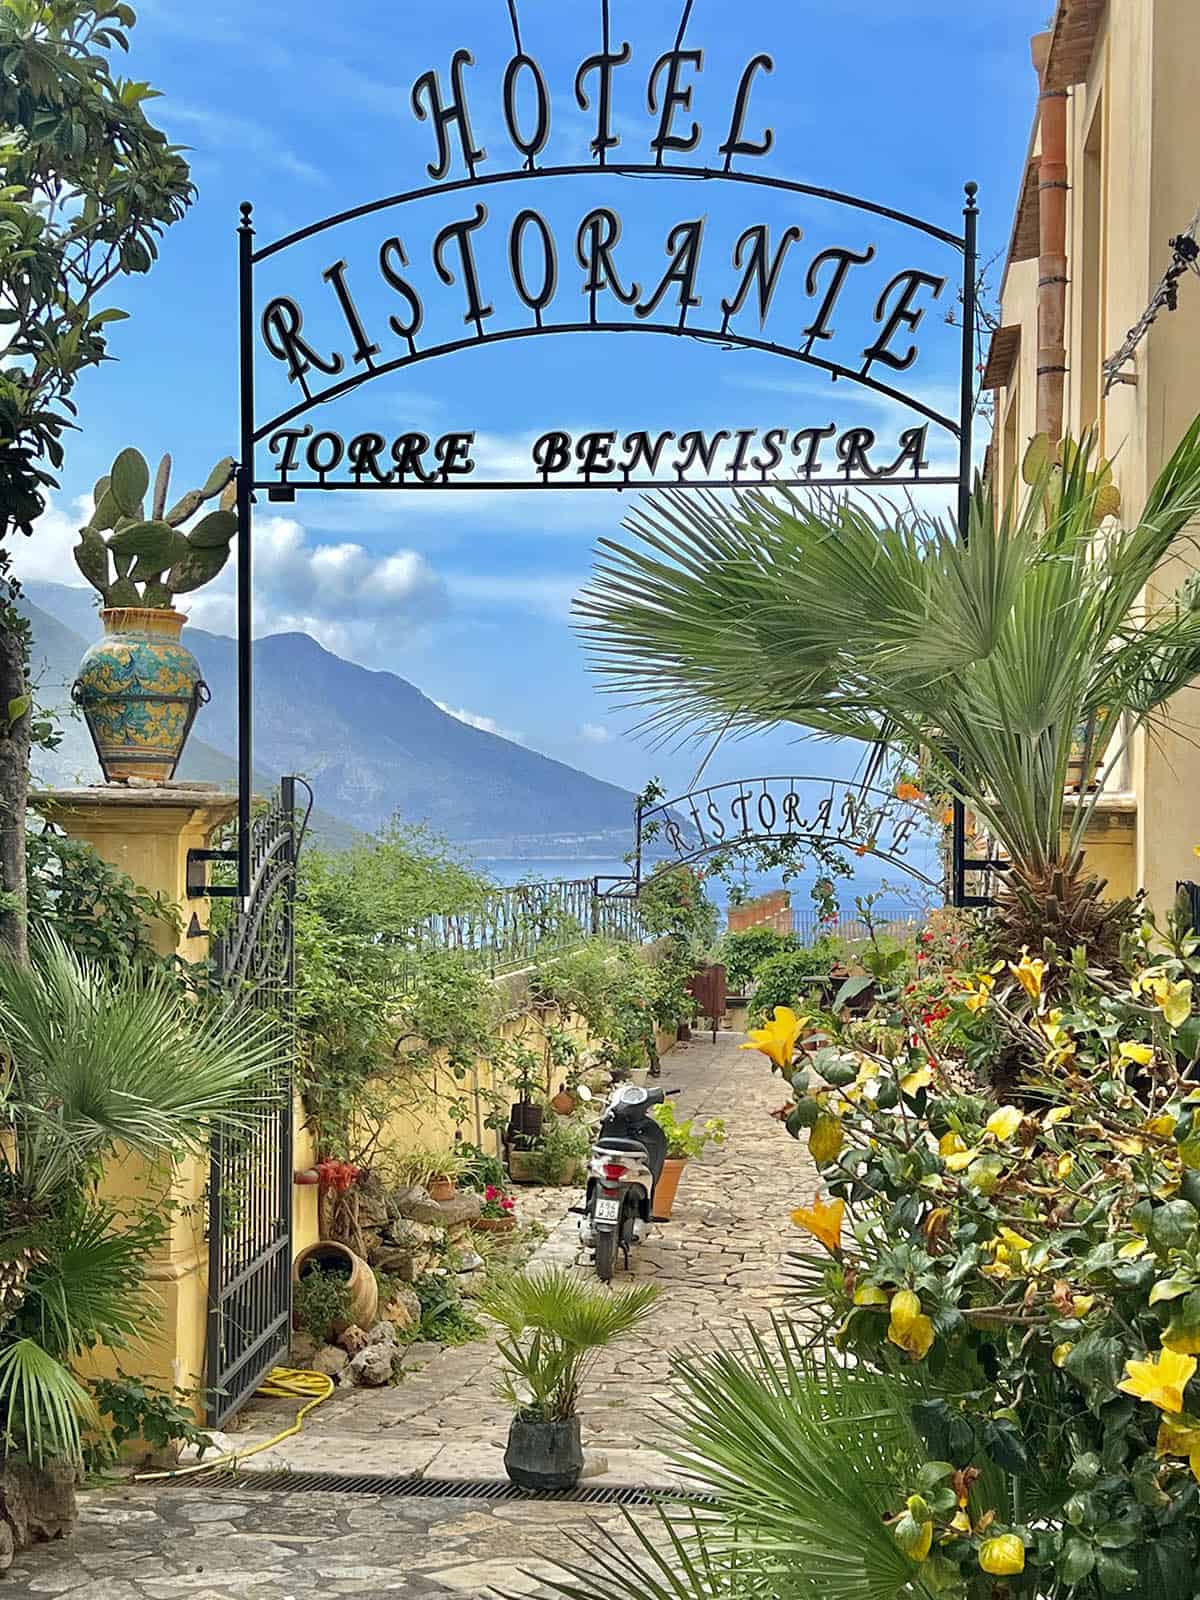 An image of the hotel Torre Bennistra with the mountains and ocean of Scopello in the background. Lush greenery in the foreground frames the hotel sign and the bright blue sky